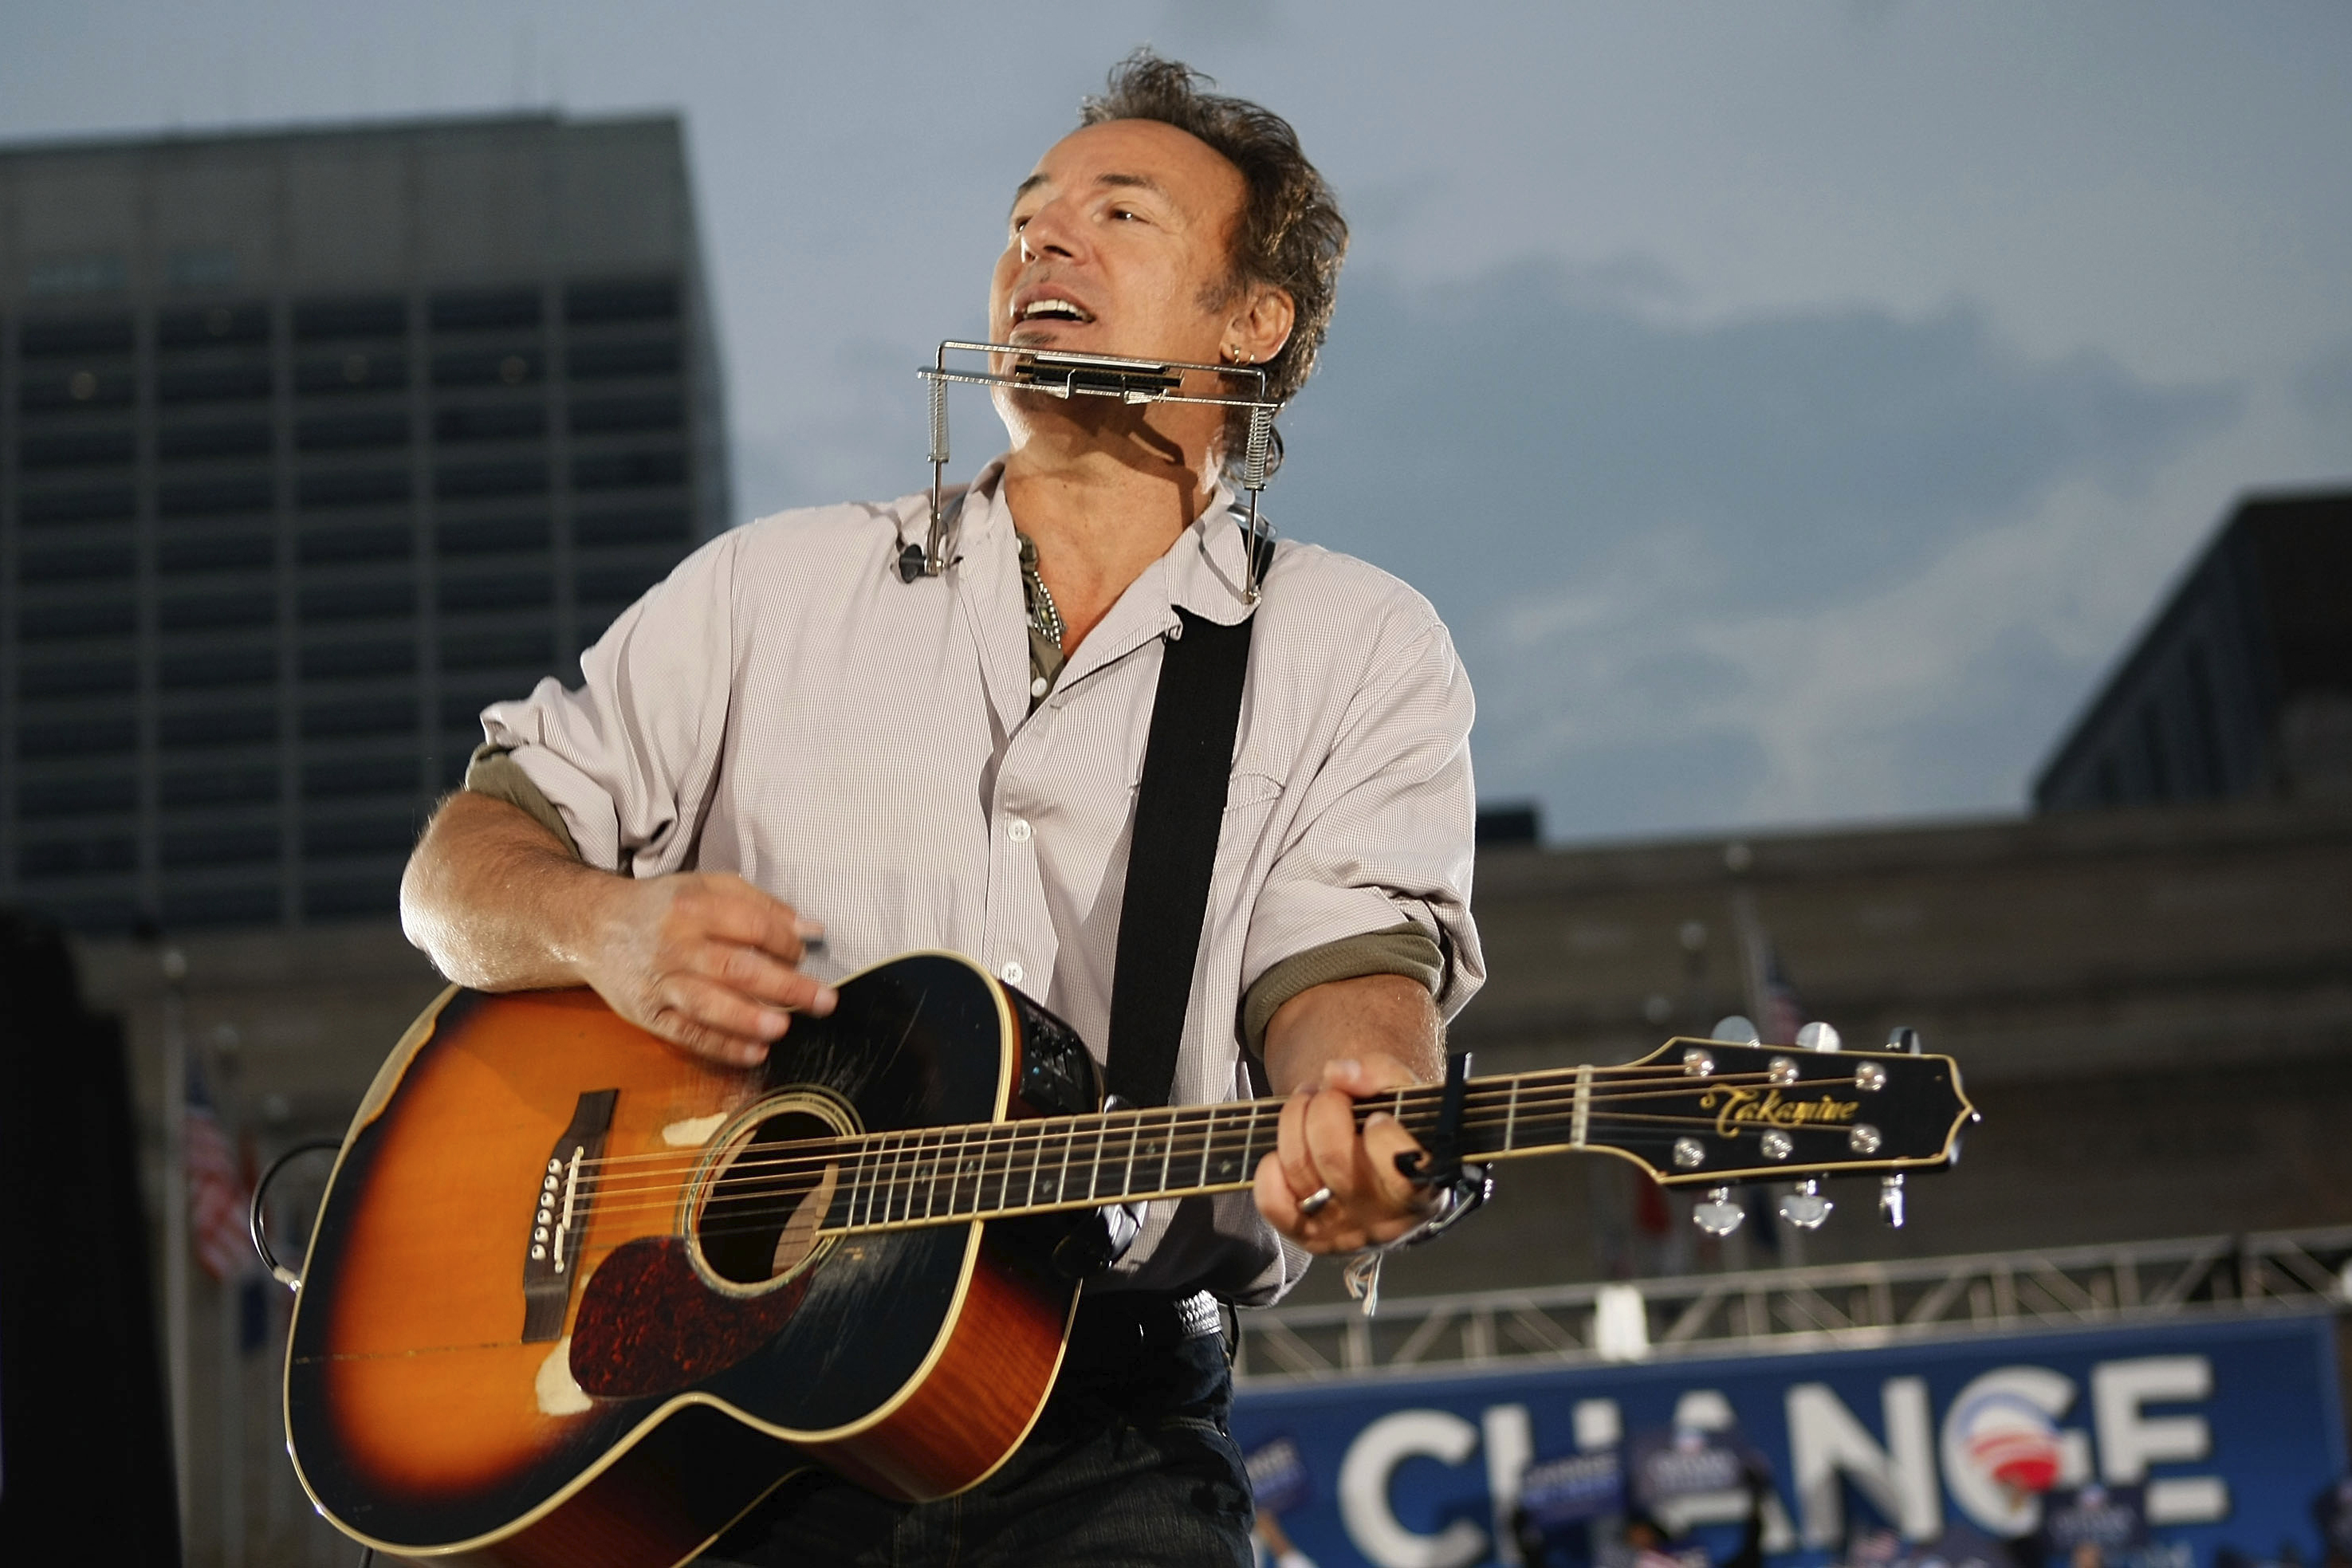 Singer Bruce Springsteen plays before Democratic presidential nominee U.S. Sen. Barack Obama (D-IL) takes the stage during a campaign rally at the Cleveland Mall November 2, 2008 in Cleveland, Ohio. Obama continues to campaign as Election Day begins to draw near as he runs against his Republican challenger, Sen. John McCain. (Photo by Joe Raedle/Getty Images)